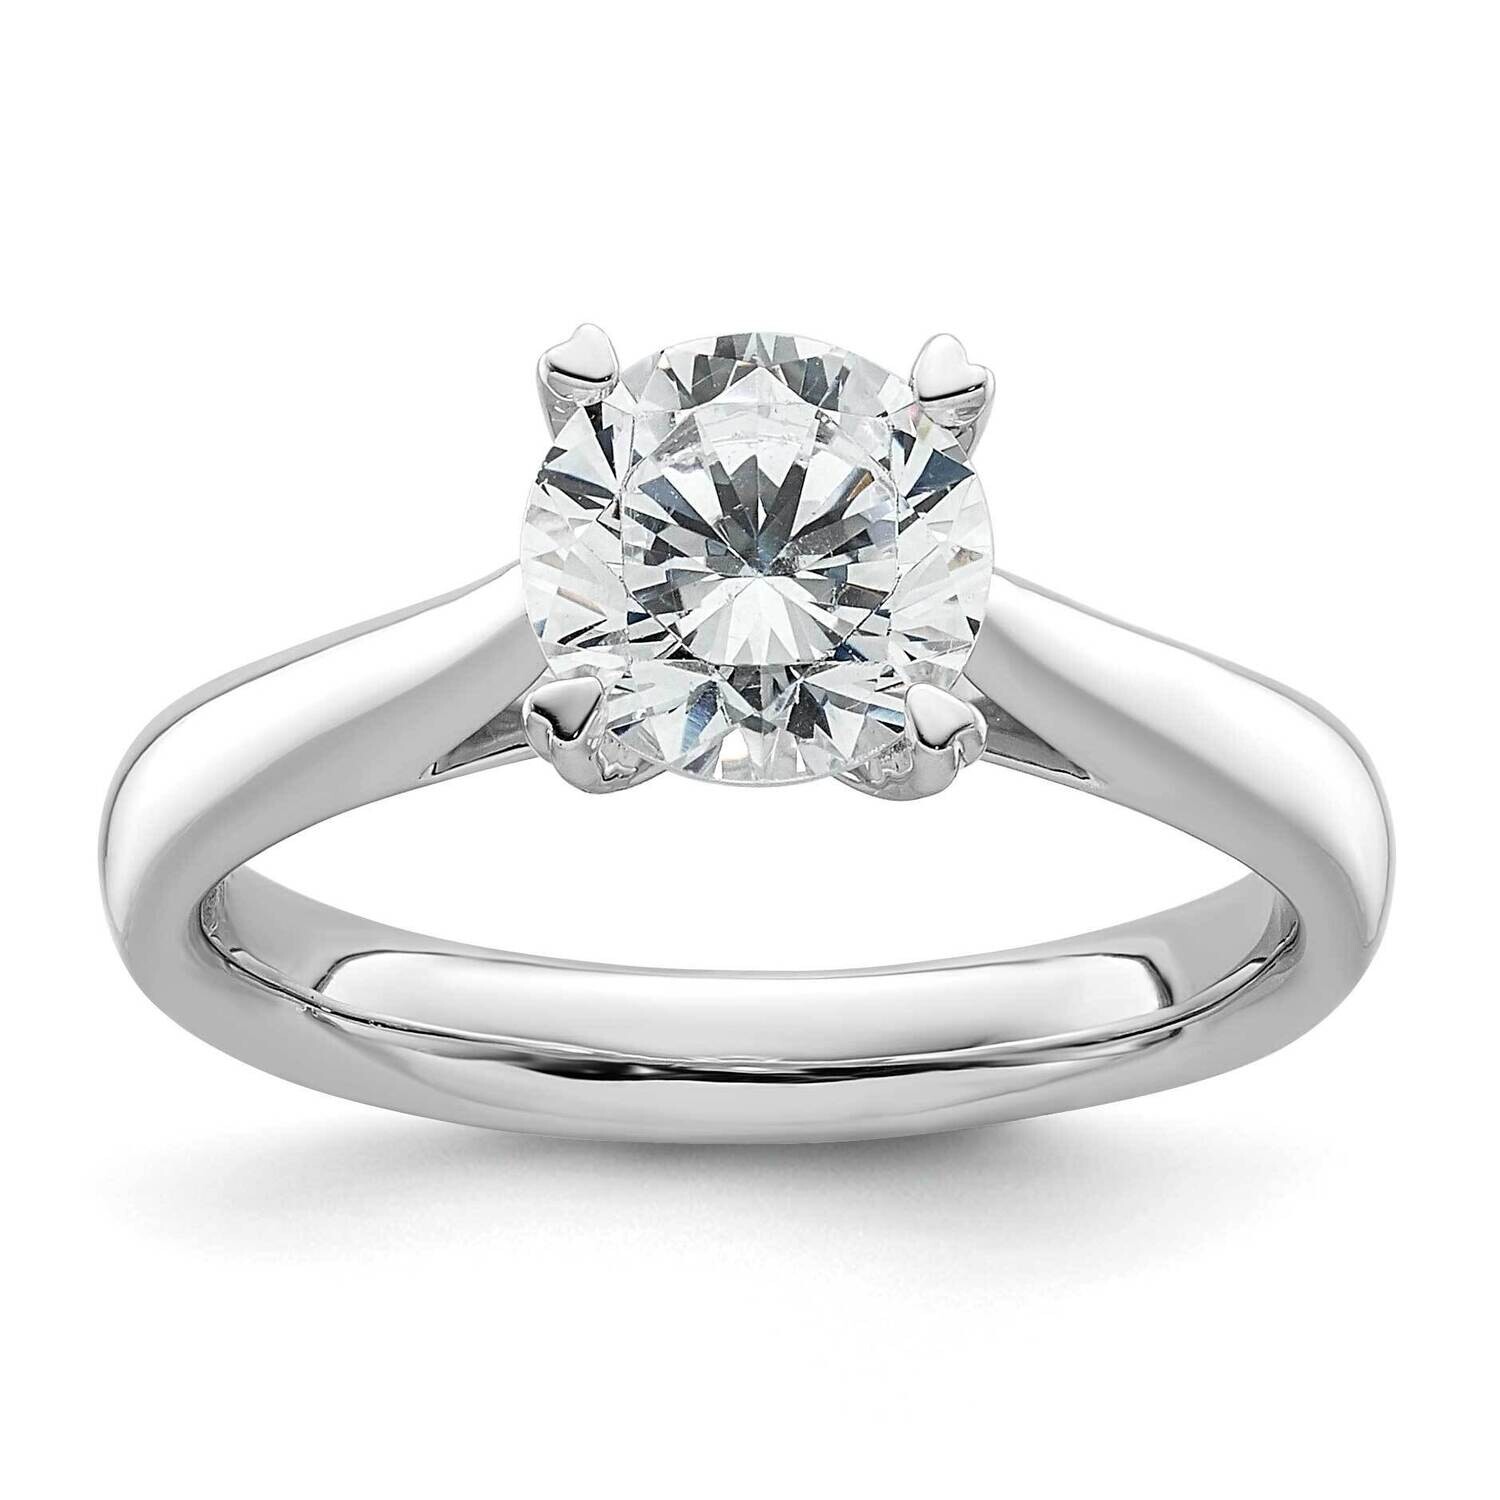 1.5 Carat 7.50 mm 4-Prong Round Solitaire Engagement Ring Mounting 14k White Gold RM1930E-150-CWAA